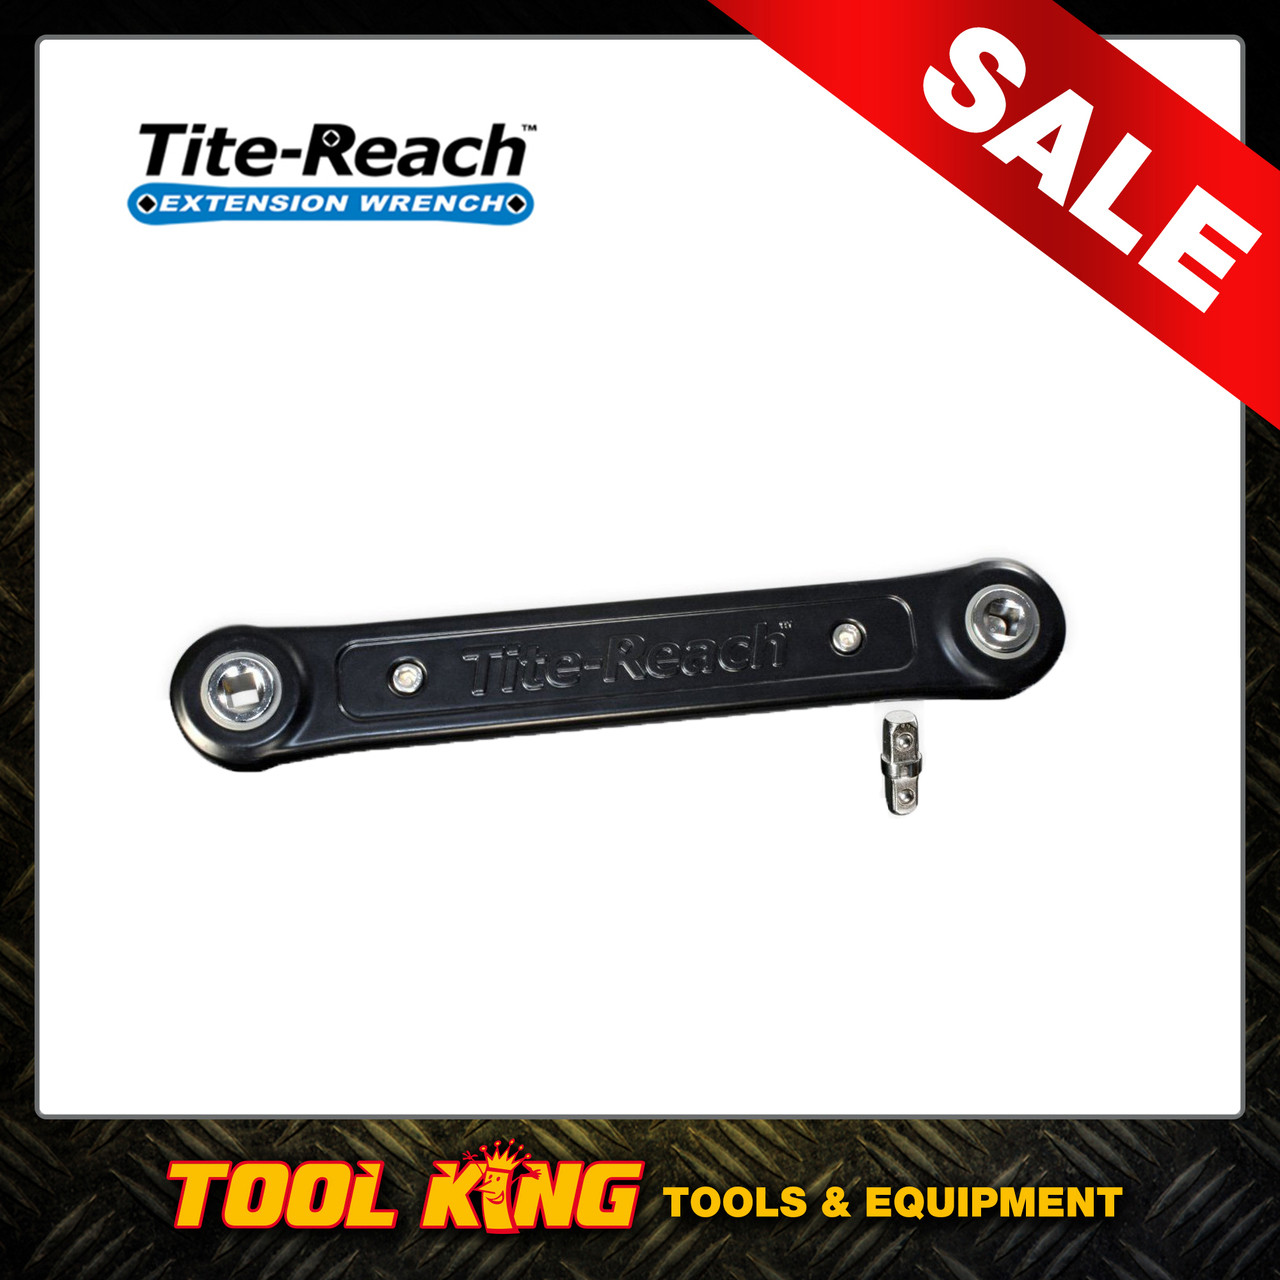 Tite-Reach TR38V1-DIY 3/8 Extension Wrench Do-It-Yourself